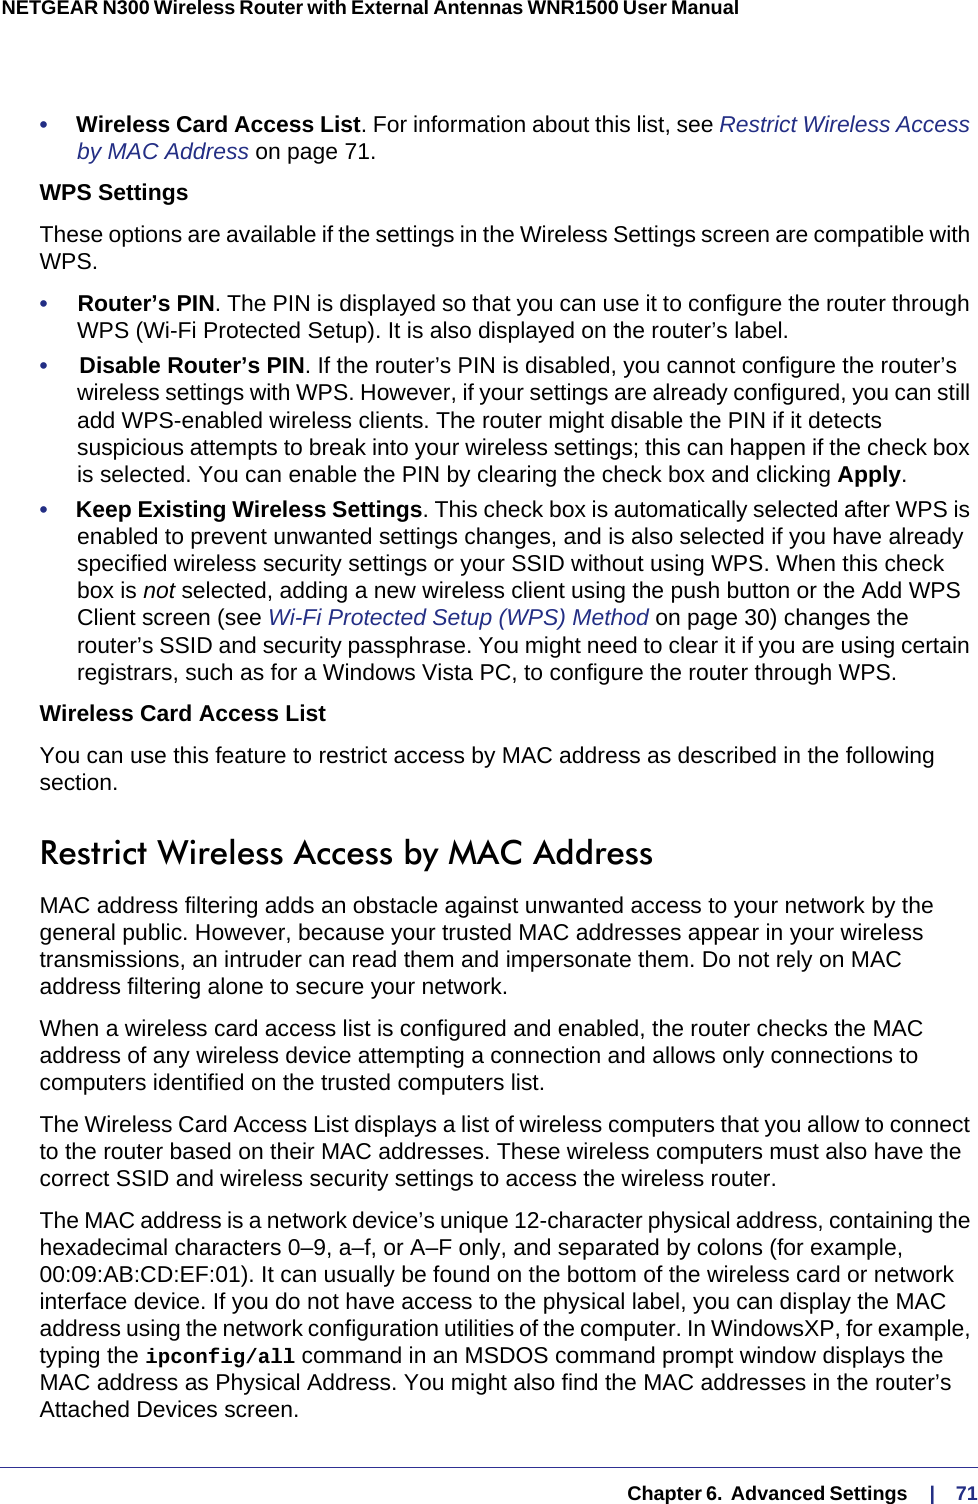   Chapter 6.  Advanced Settings     |    71NETGEAR N300 Wireless Router with External Antennas WNR1500 User Manual •     Wireless Card Access List. For information about this list, see Restrict Wireless Access by MAC Address on page  71.WPS SettingsThese options are available if the settings in the Wireless Settings screen are compatible with WPS. •     Router’s PIN. The PIN is displayed so that you can use it to configure the router through WPS (Wi-Fi Protected Setup). It is also displayed on the router’s label.•     Disable Router’s PIN. If the router’s PIN is disabled, you cannot configure the router’s wireless settings with WPS. However, if your settings are already configured, you can still add WPS-enabled wireless clients. The router might disable the PIN if it detects suspicious attempts to break into your wireless settings; this can happen if the check box is selected. You can enable the PIN by clearing the check box and clicking Apply. •     Keep Existing Wireless Settings. This check box is automatically selected after WPS is enabled to prevent unwanted settings changes, and is also selected if you have already specified wireless security settings or your SSID without using WPS. When this check box is not selected, adding a new wireless client using the push button or the Add WPS Client screen (see Wi-Fi Protected Setup (WPS) Method on page  30) changes the router’s SSID and security passphrase. You might need to clear it if you are using certain registrars, such as for a Windows Vista PC, to configure the router through WPS.Wireless Card Access ListYou can use this feature to restrict access by MAC address as described in the following section.Restrict Wireless Access by MAC AddressMAC address filtering adds an obstacle against unwanted access to your network by the general public. However, because your trusted MAC addresses appear in your wireless transmissions, an intruder can read them and impersonate them. Do not rely on MAC address filtering alone to secure your network.When a wireless card access list is configured and enabled, the router checks the MAC address of any wireless device attempting a connection and allows only connections to computers identified on the trusted computers list. The Wireless Card Access List displays a list of wireless computers that you allow to connect to the router based on their MAC addresses. These wireless computers must also have the correct SSID and wireless security settings to access the wireless router.The MAC address is a network device’s unique 12-character physical address, containing the hexadecimal characters 0–9, a–f, or A–F only, and separated by colons (for example, 00:09:AB:CD:EF:01). It can usually be found on the bottom of the wireless card or network interface device. If you do not have access to the physical label, you can display the MAC address using the network configuration utilities of the computer. In WindowsXP, for example, typing the ipconfig/all command in an MSDOS command prompt window displays the MAC address as Physical Address. You might also find the MAC addresses in the router’s Attached Devices screen.